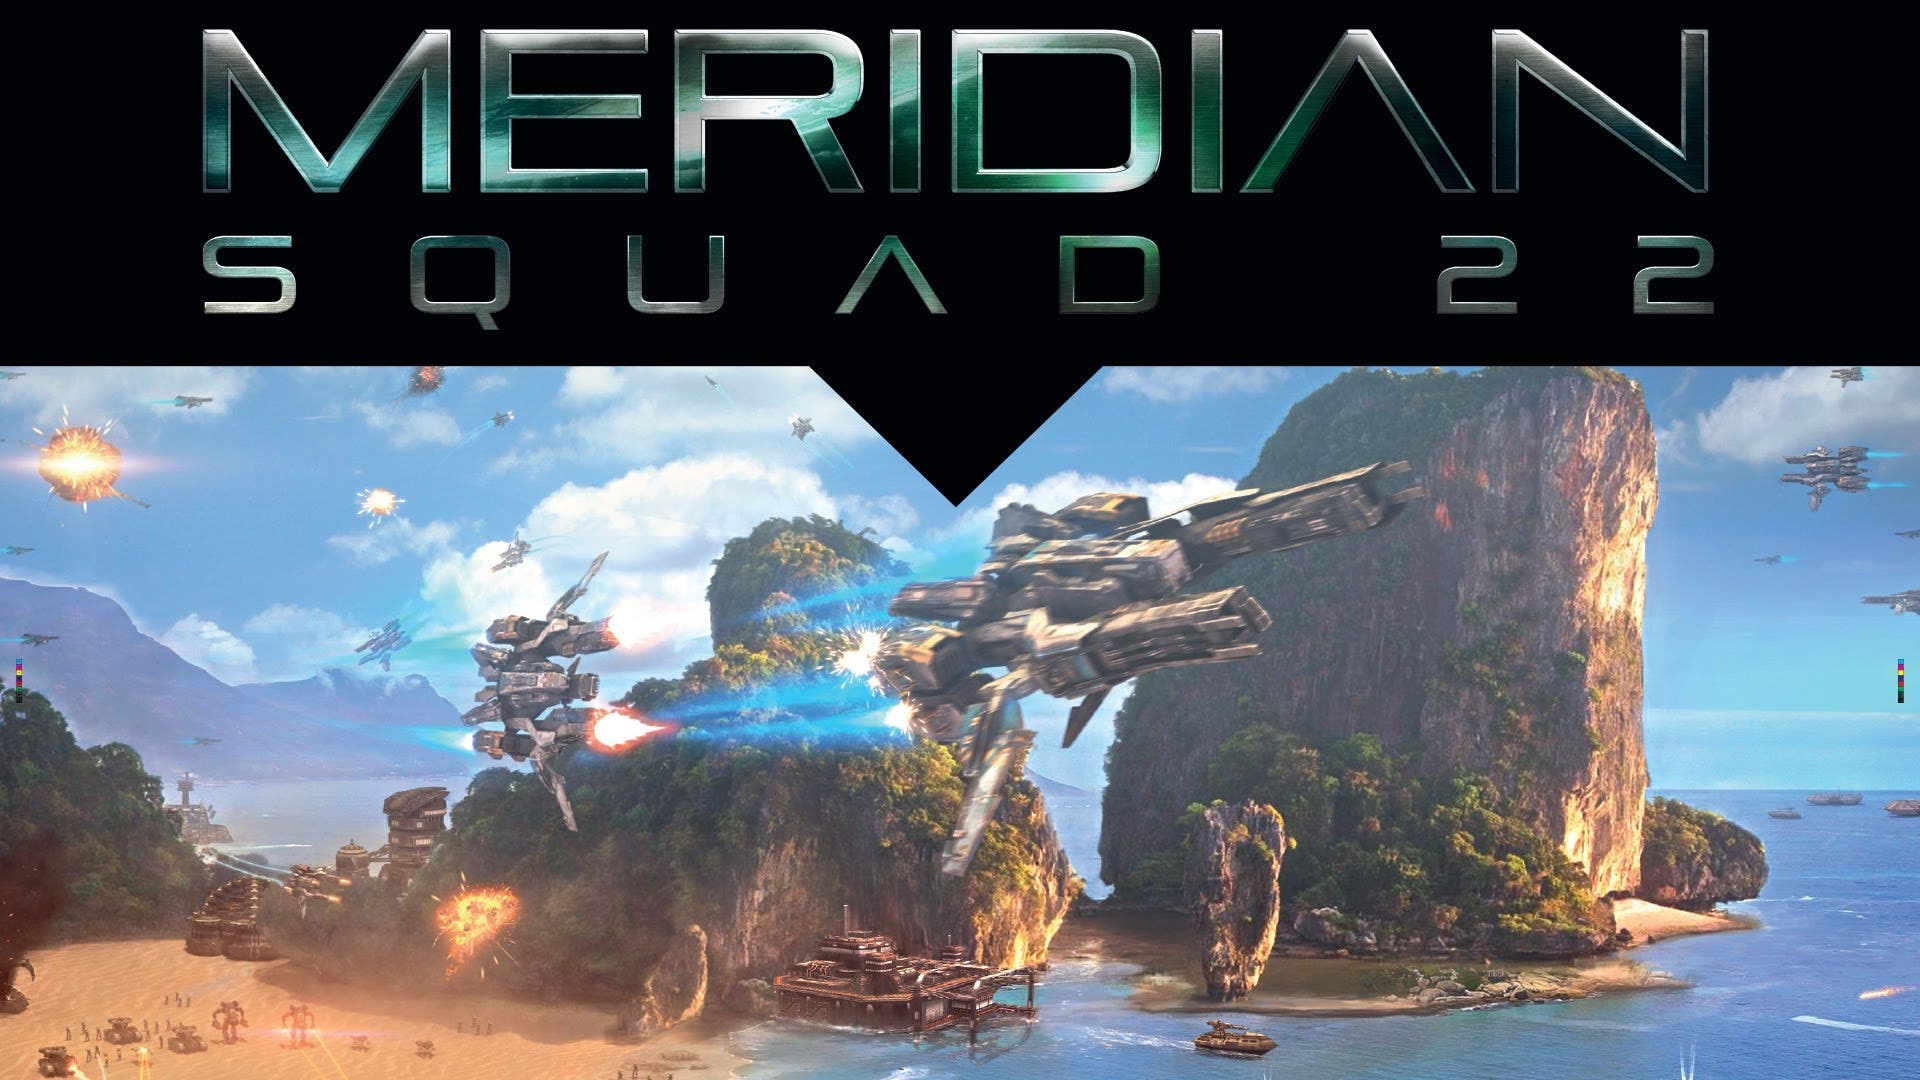 sequel to meridian new world is